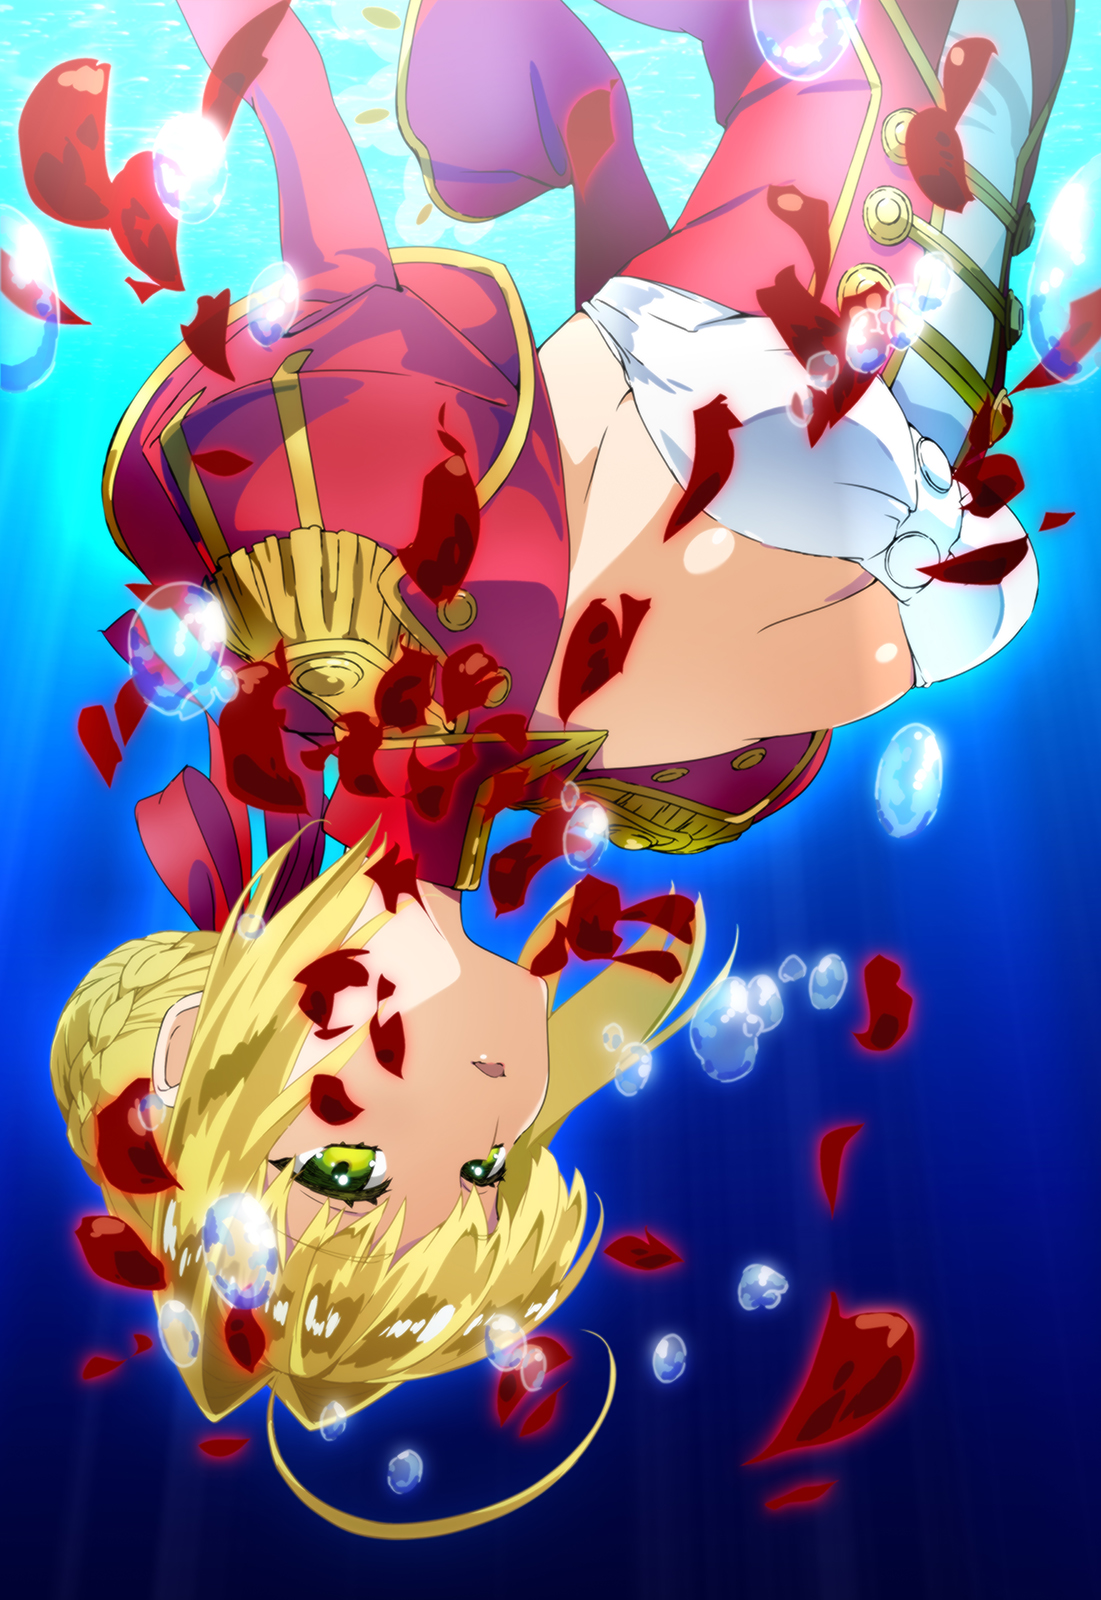 Special Fate Extra Last Encore Official Website